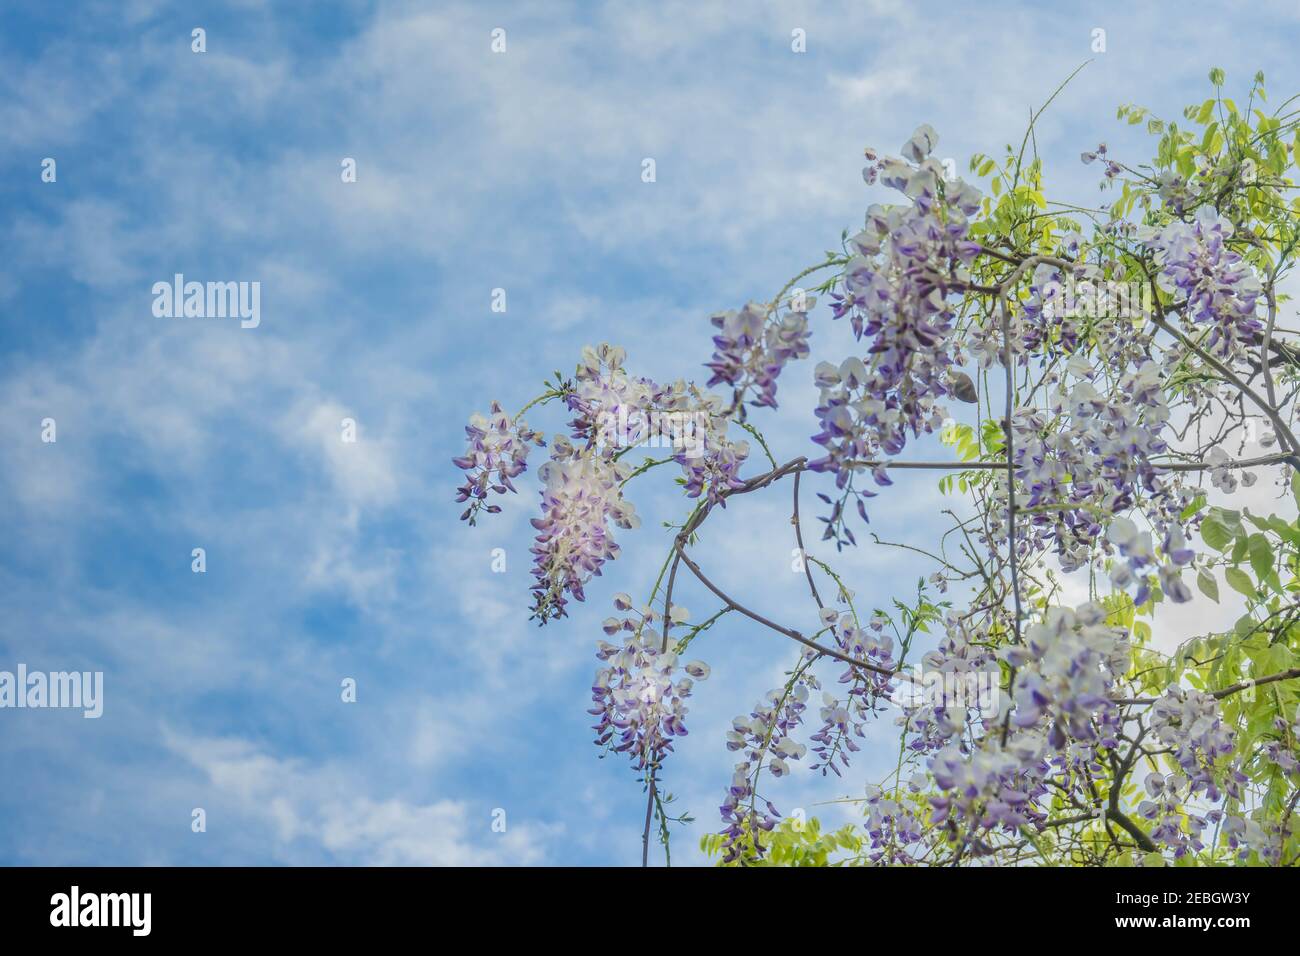 Flowering violet wisteria plants on blue sky with white clouds background. Blooming spring flowers of wisteria. Wisteria - genus of flowering plants i Stock Photo